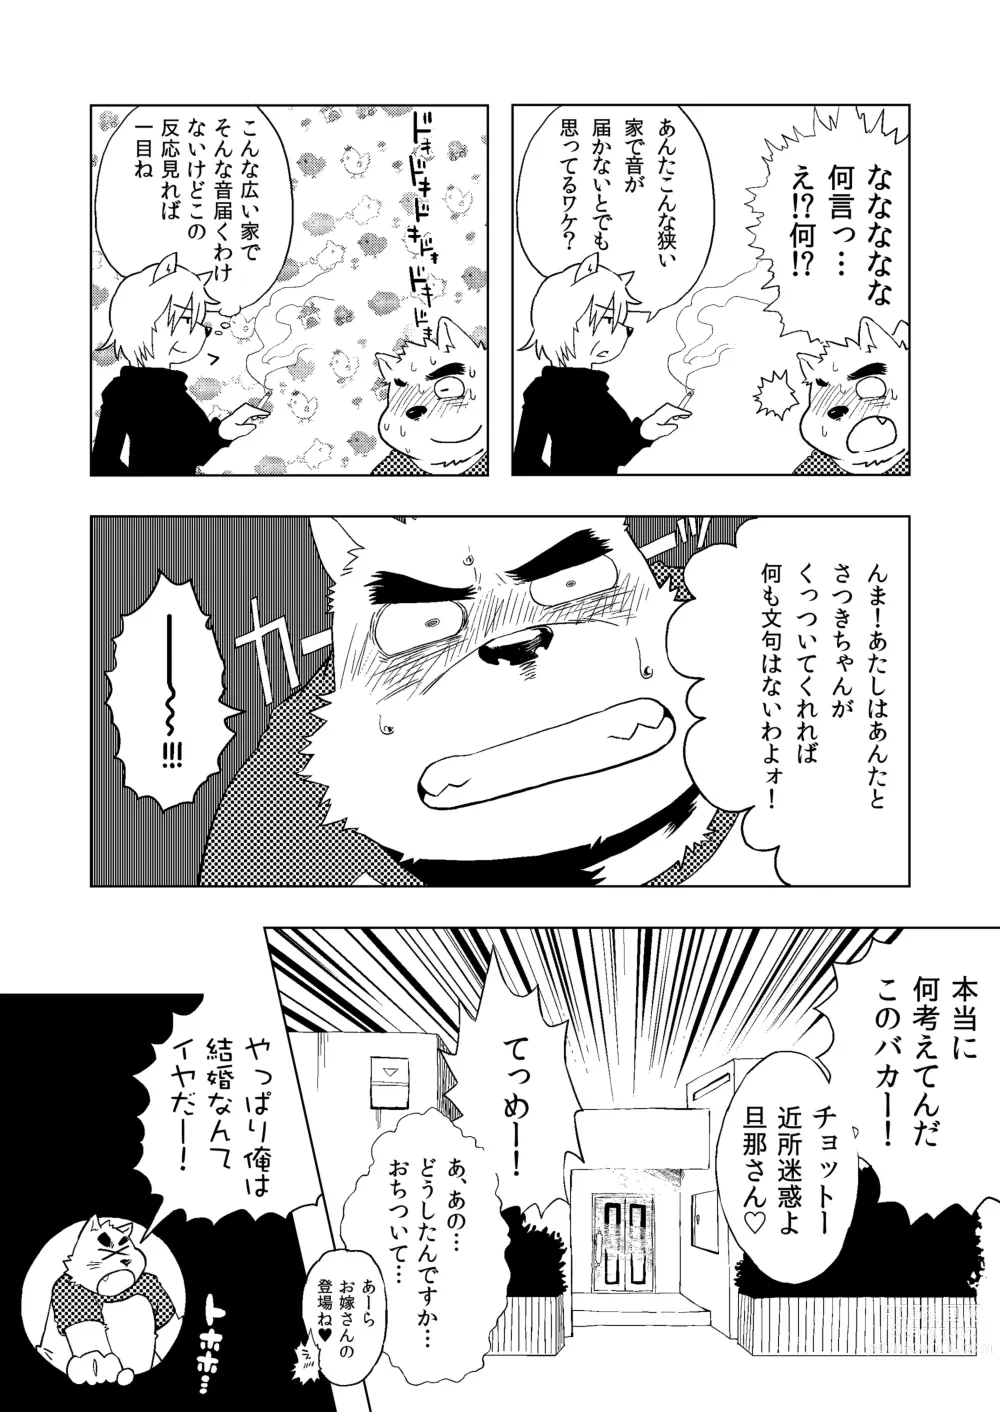 Page 21 of doujinshi Is it true that you are getting married!?